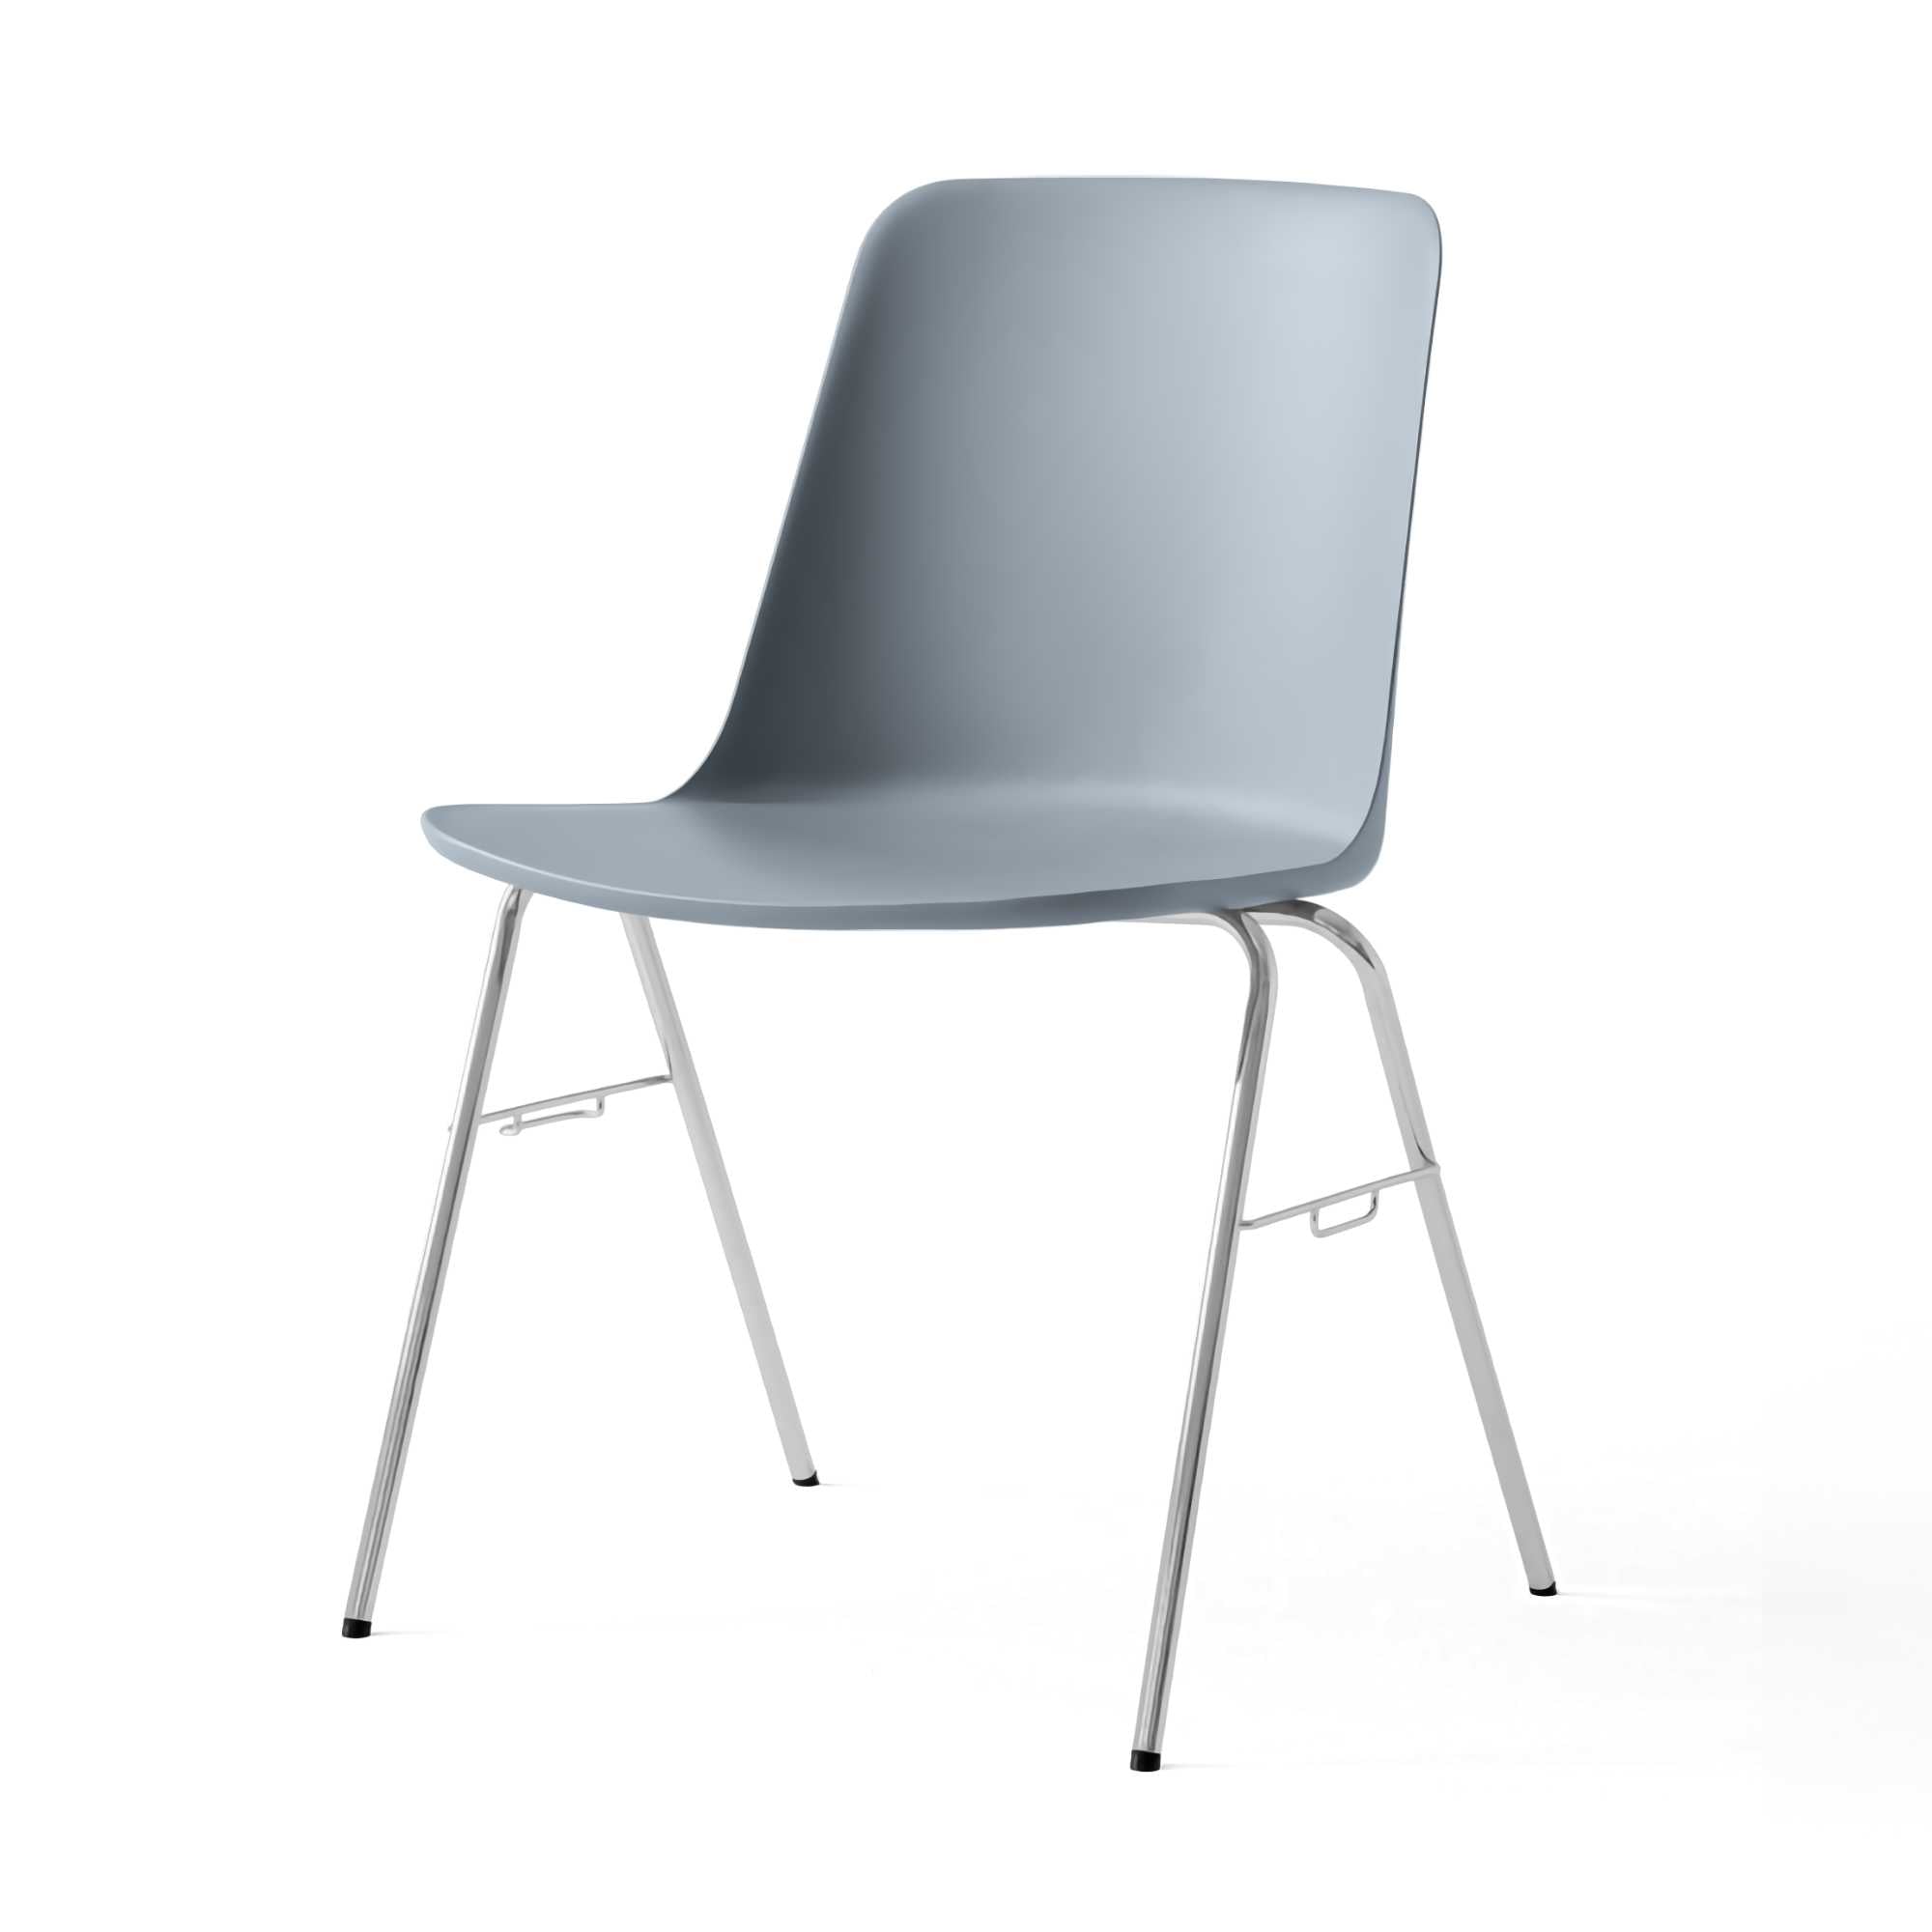 &tradition Rely chair HW27, light blue